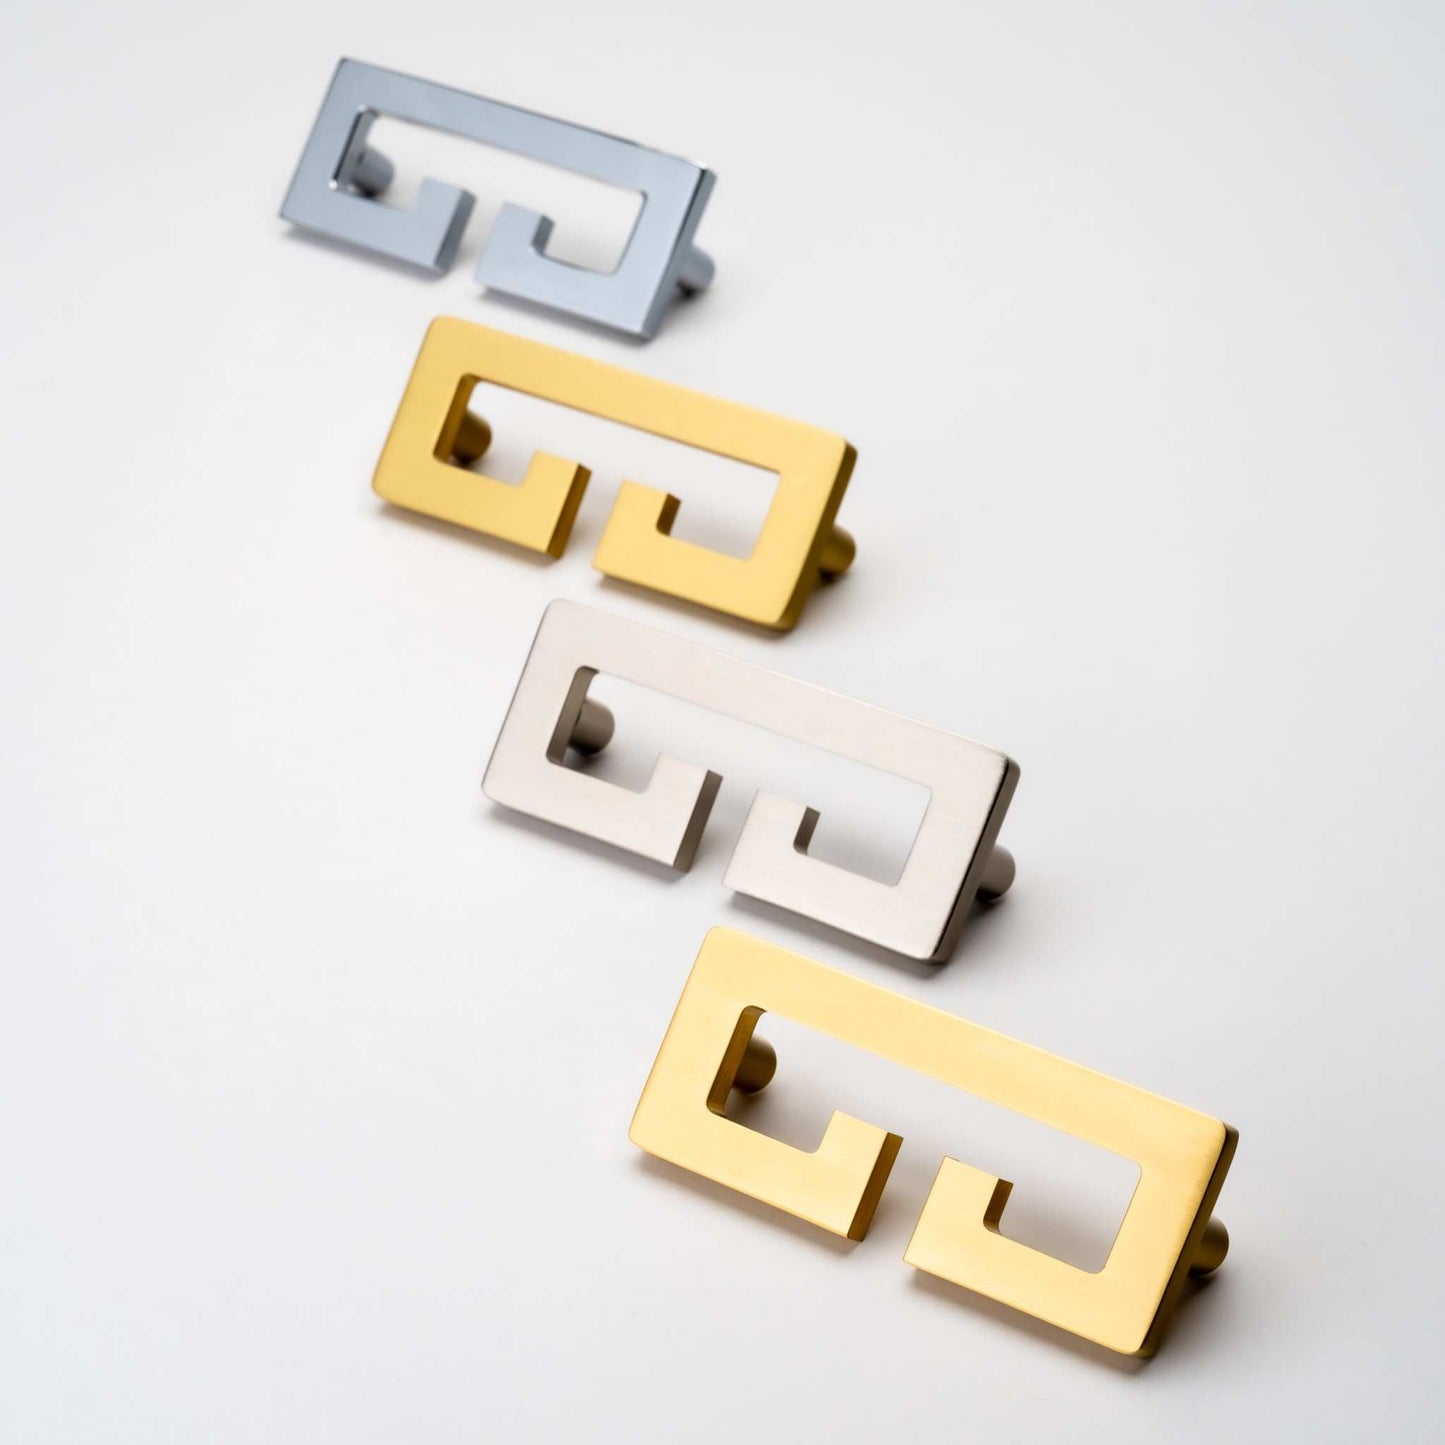 Chloe, Solid Brass Greek Key Pull

Chloe, our solid brass modern Greek Key pull is certainly an artful addition to the home. It's unique shape makes any door or cabinet look classy and chic. With ChpullChloe, Solid Brass Greek Key Pull